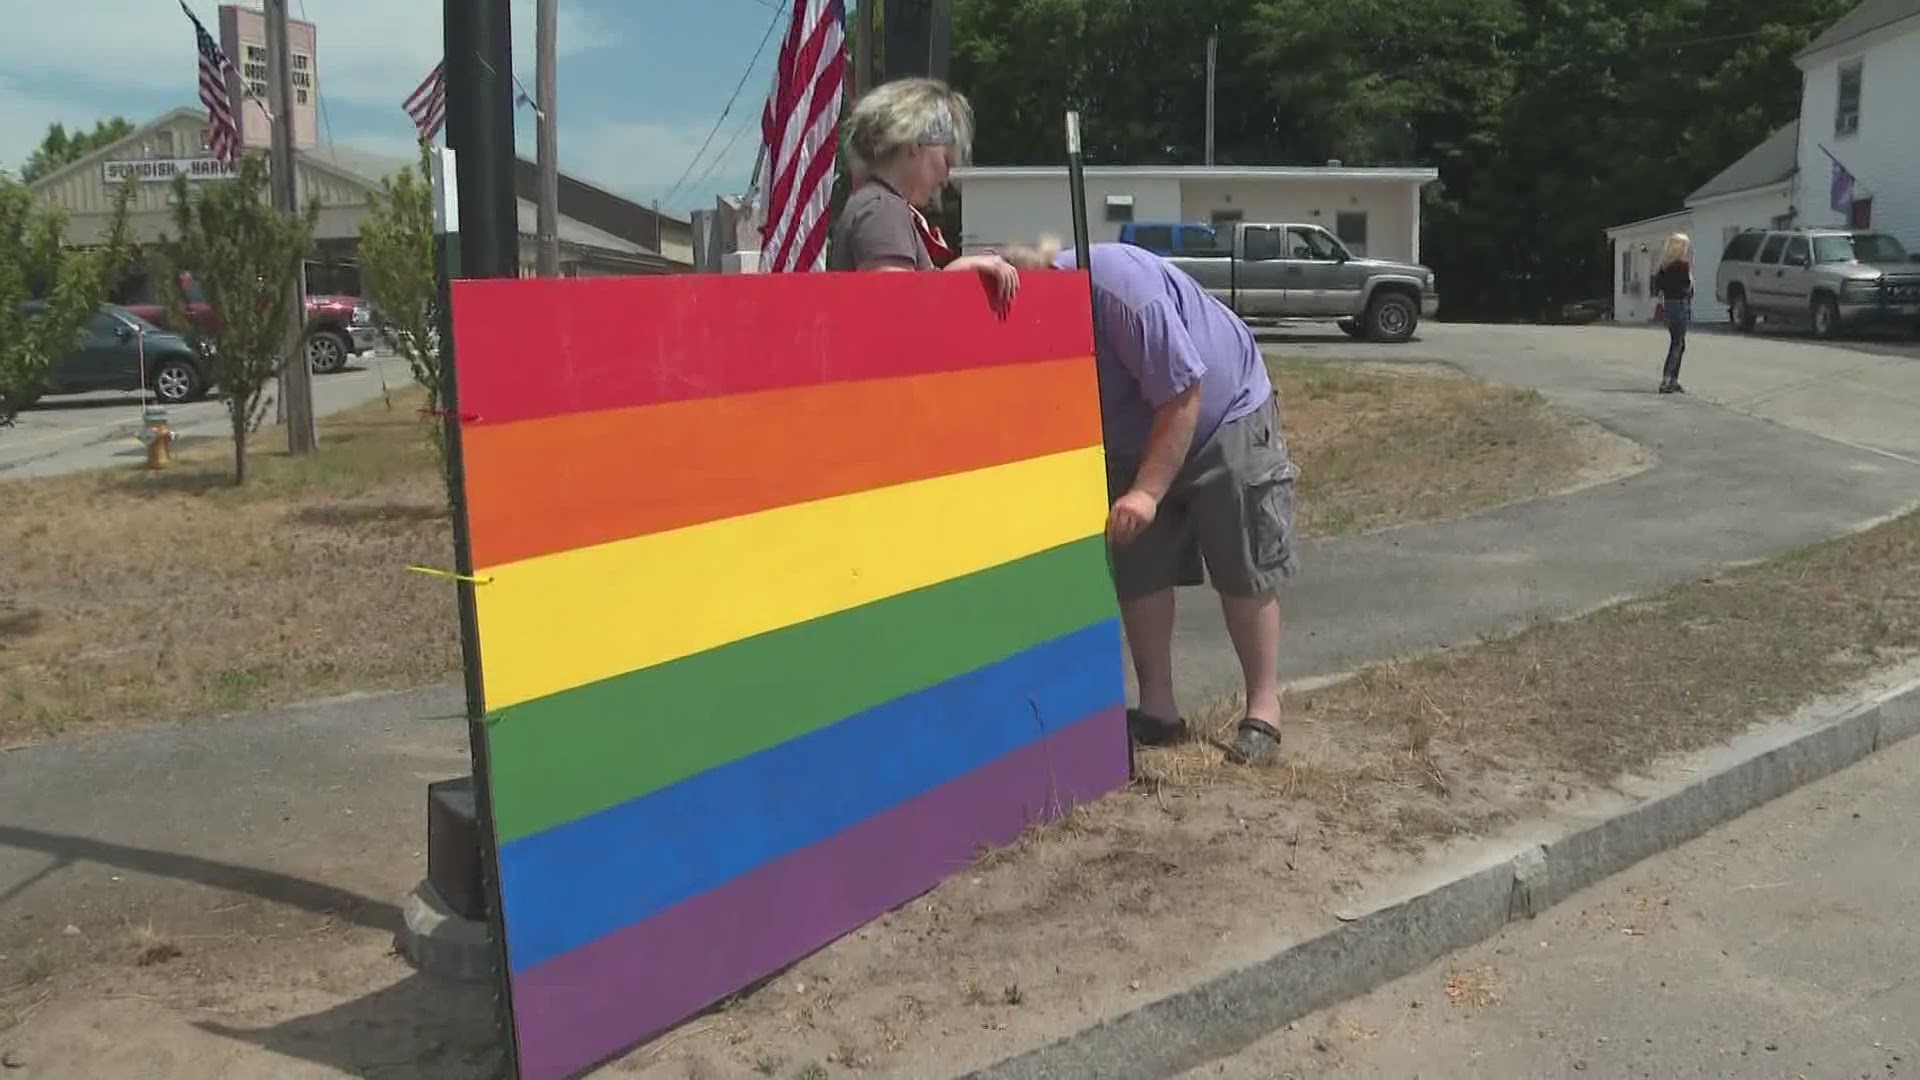 Tensions running high in Standish over a PRIDE sign put up in the small town